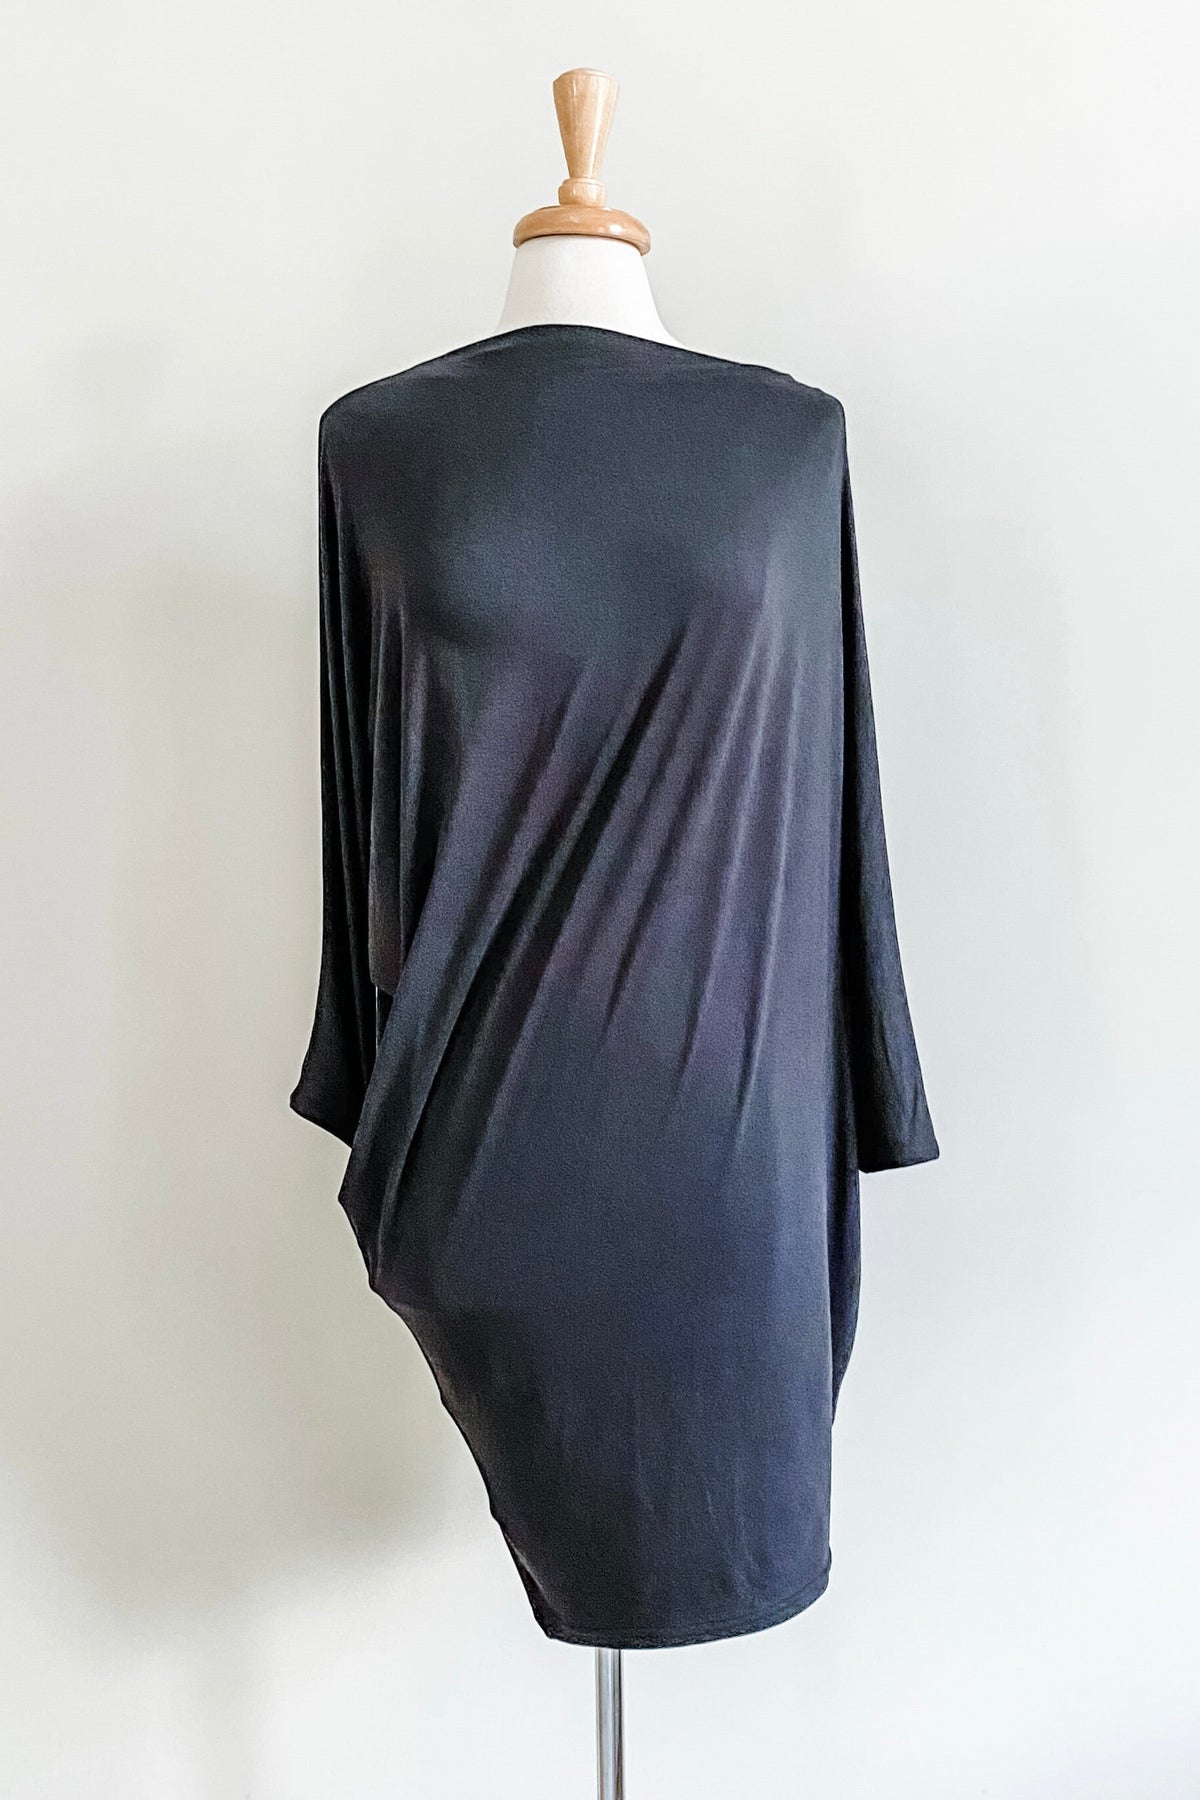 Diane Kroe Origami Dress (Black) - The Classic Capsule Collection